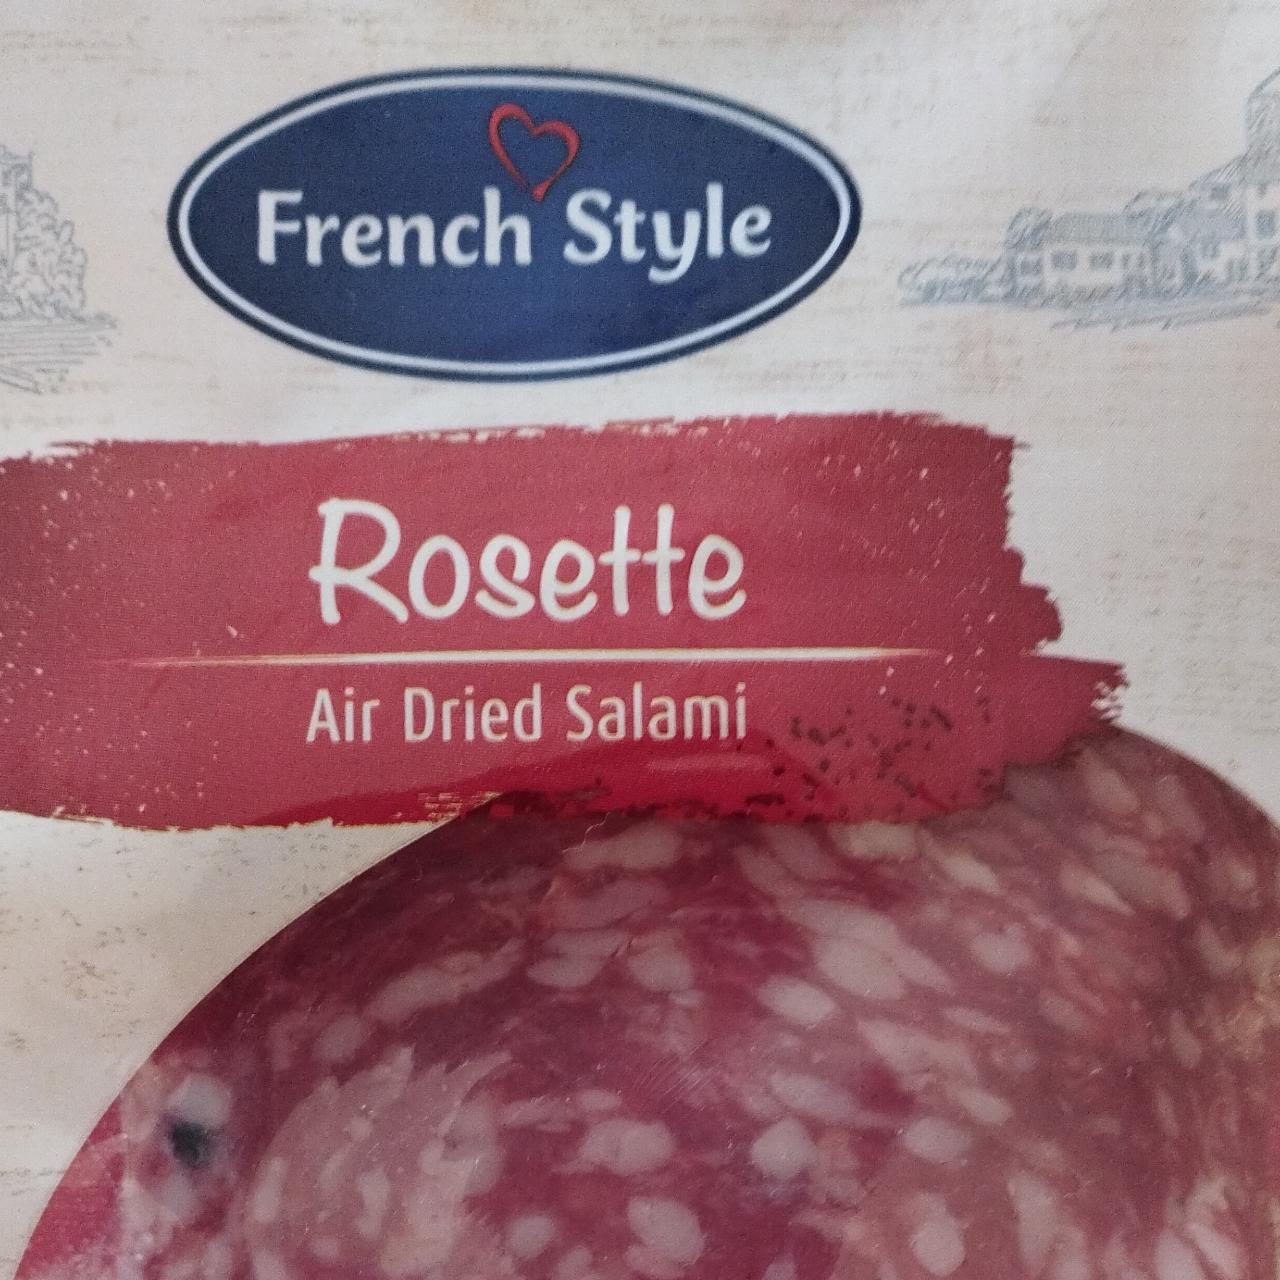 Fotografie - Rosette Air Dried Salami French style